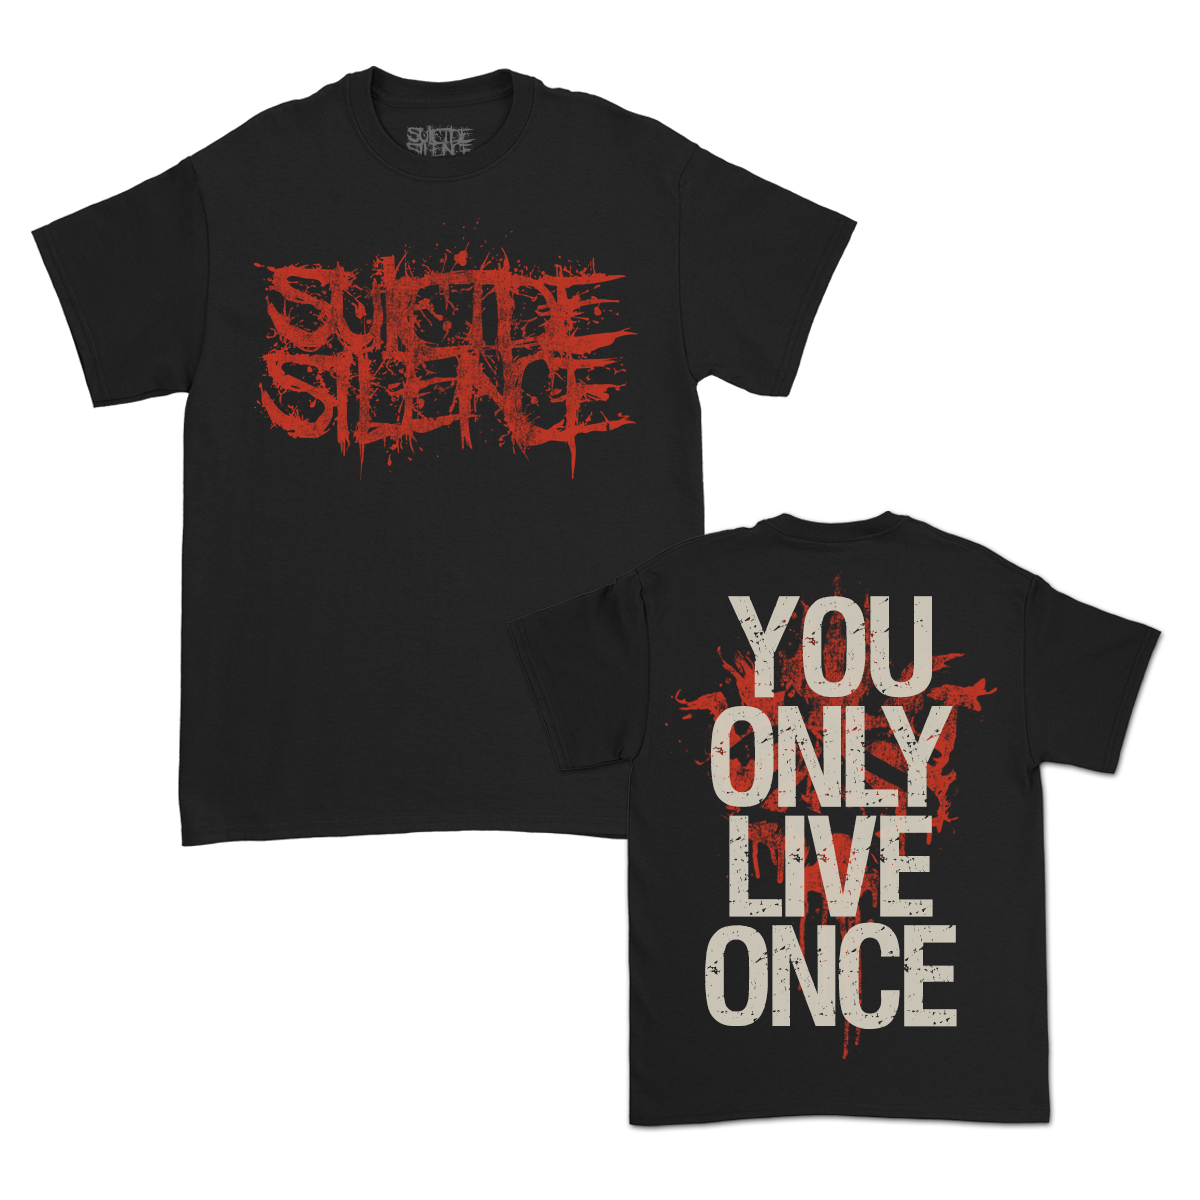 You Only Live Once T-Shirt (Black)